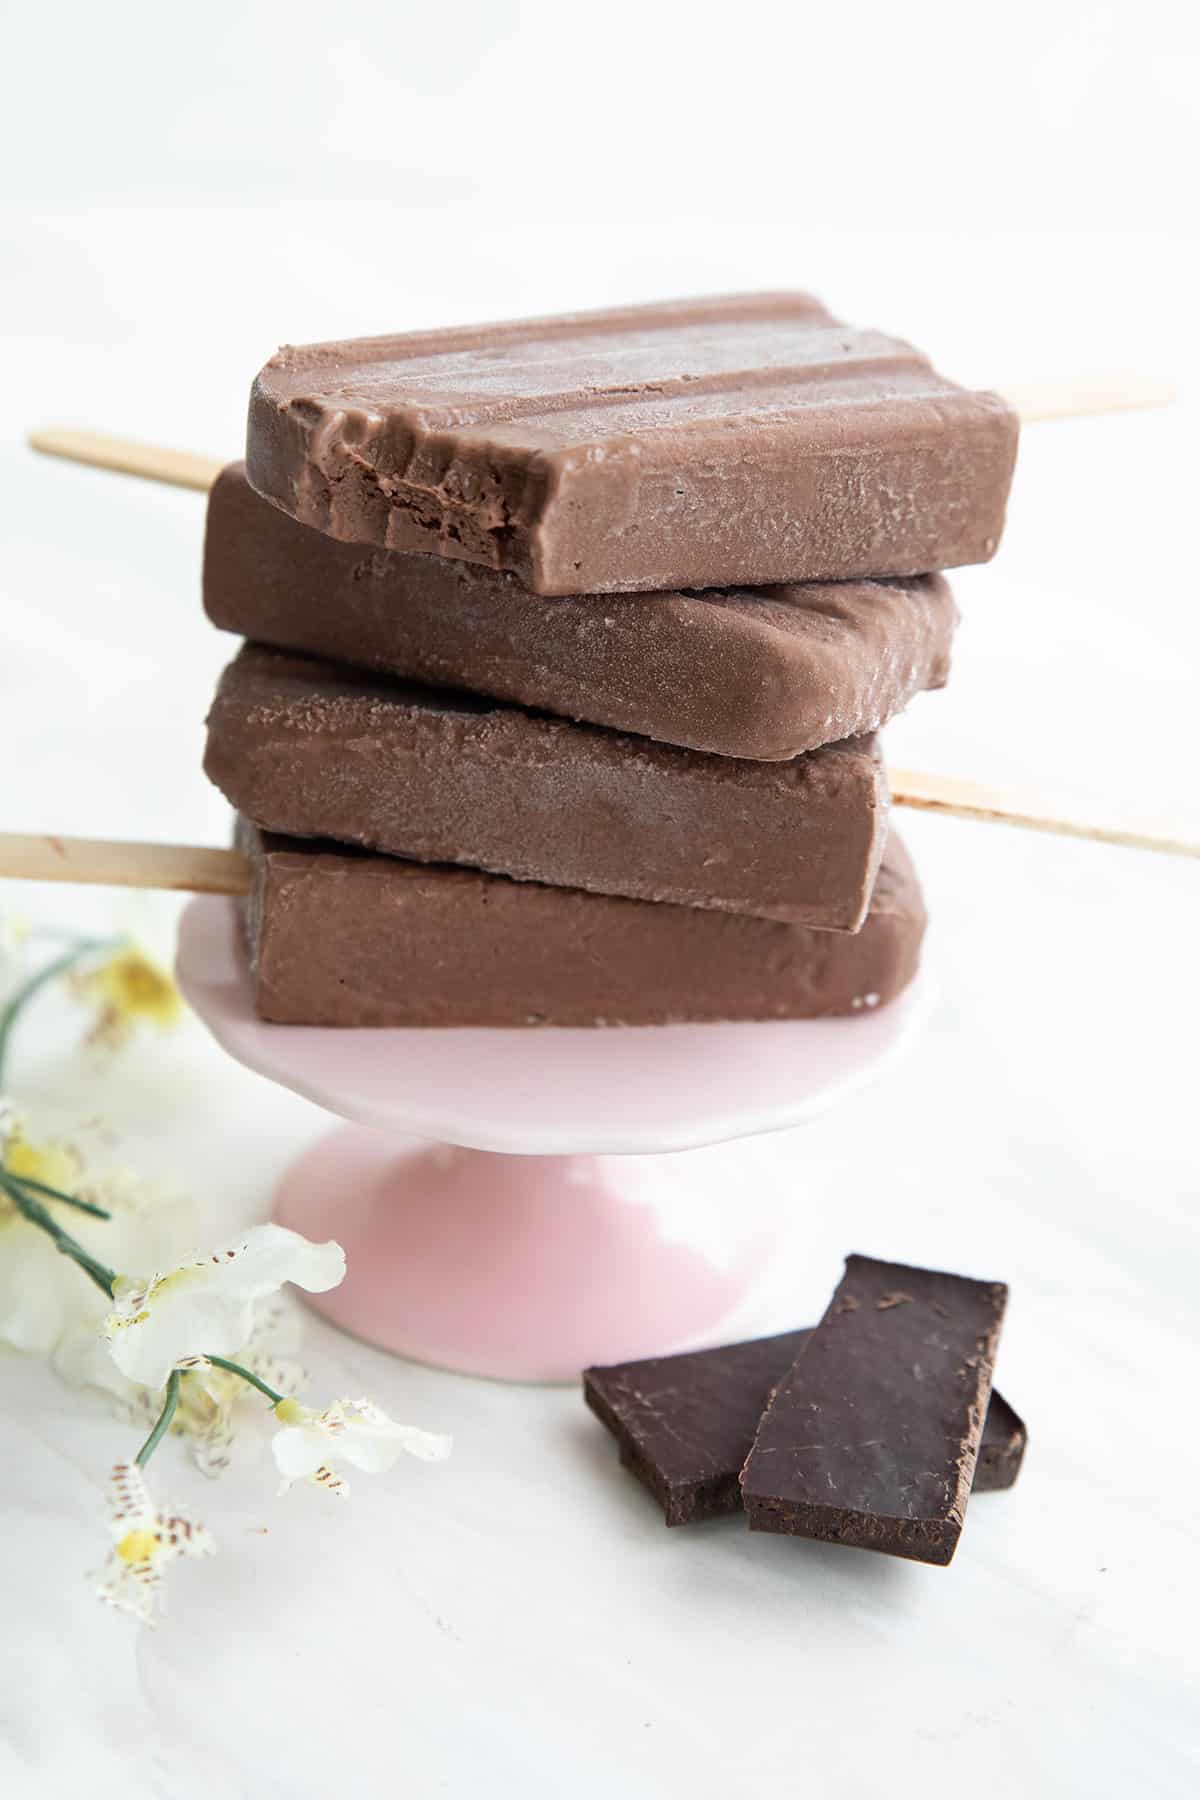 A stack of Sugar Free Fudge Pops on a pink cake stand, with a bite taken out of the top one.